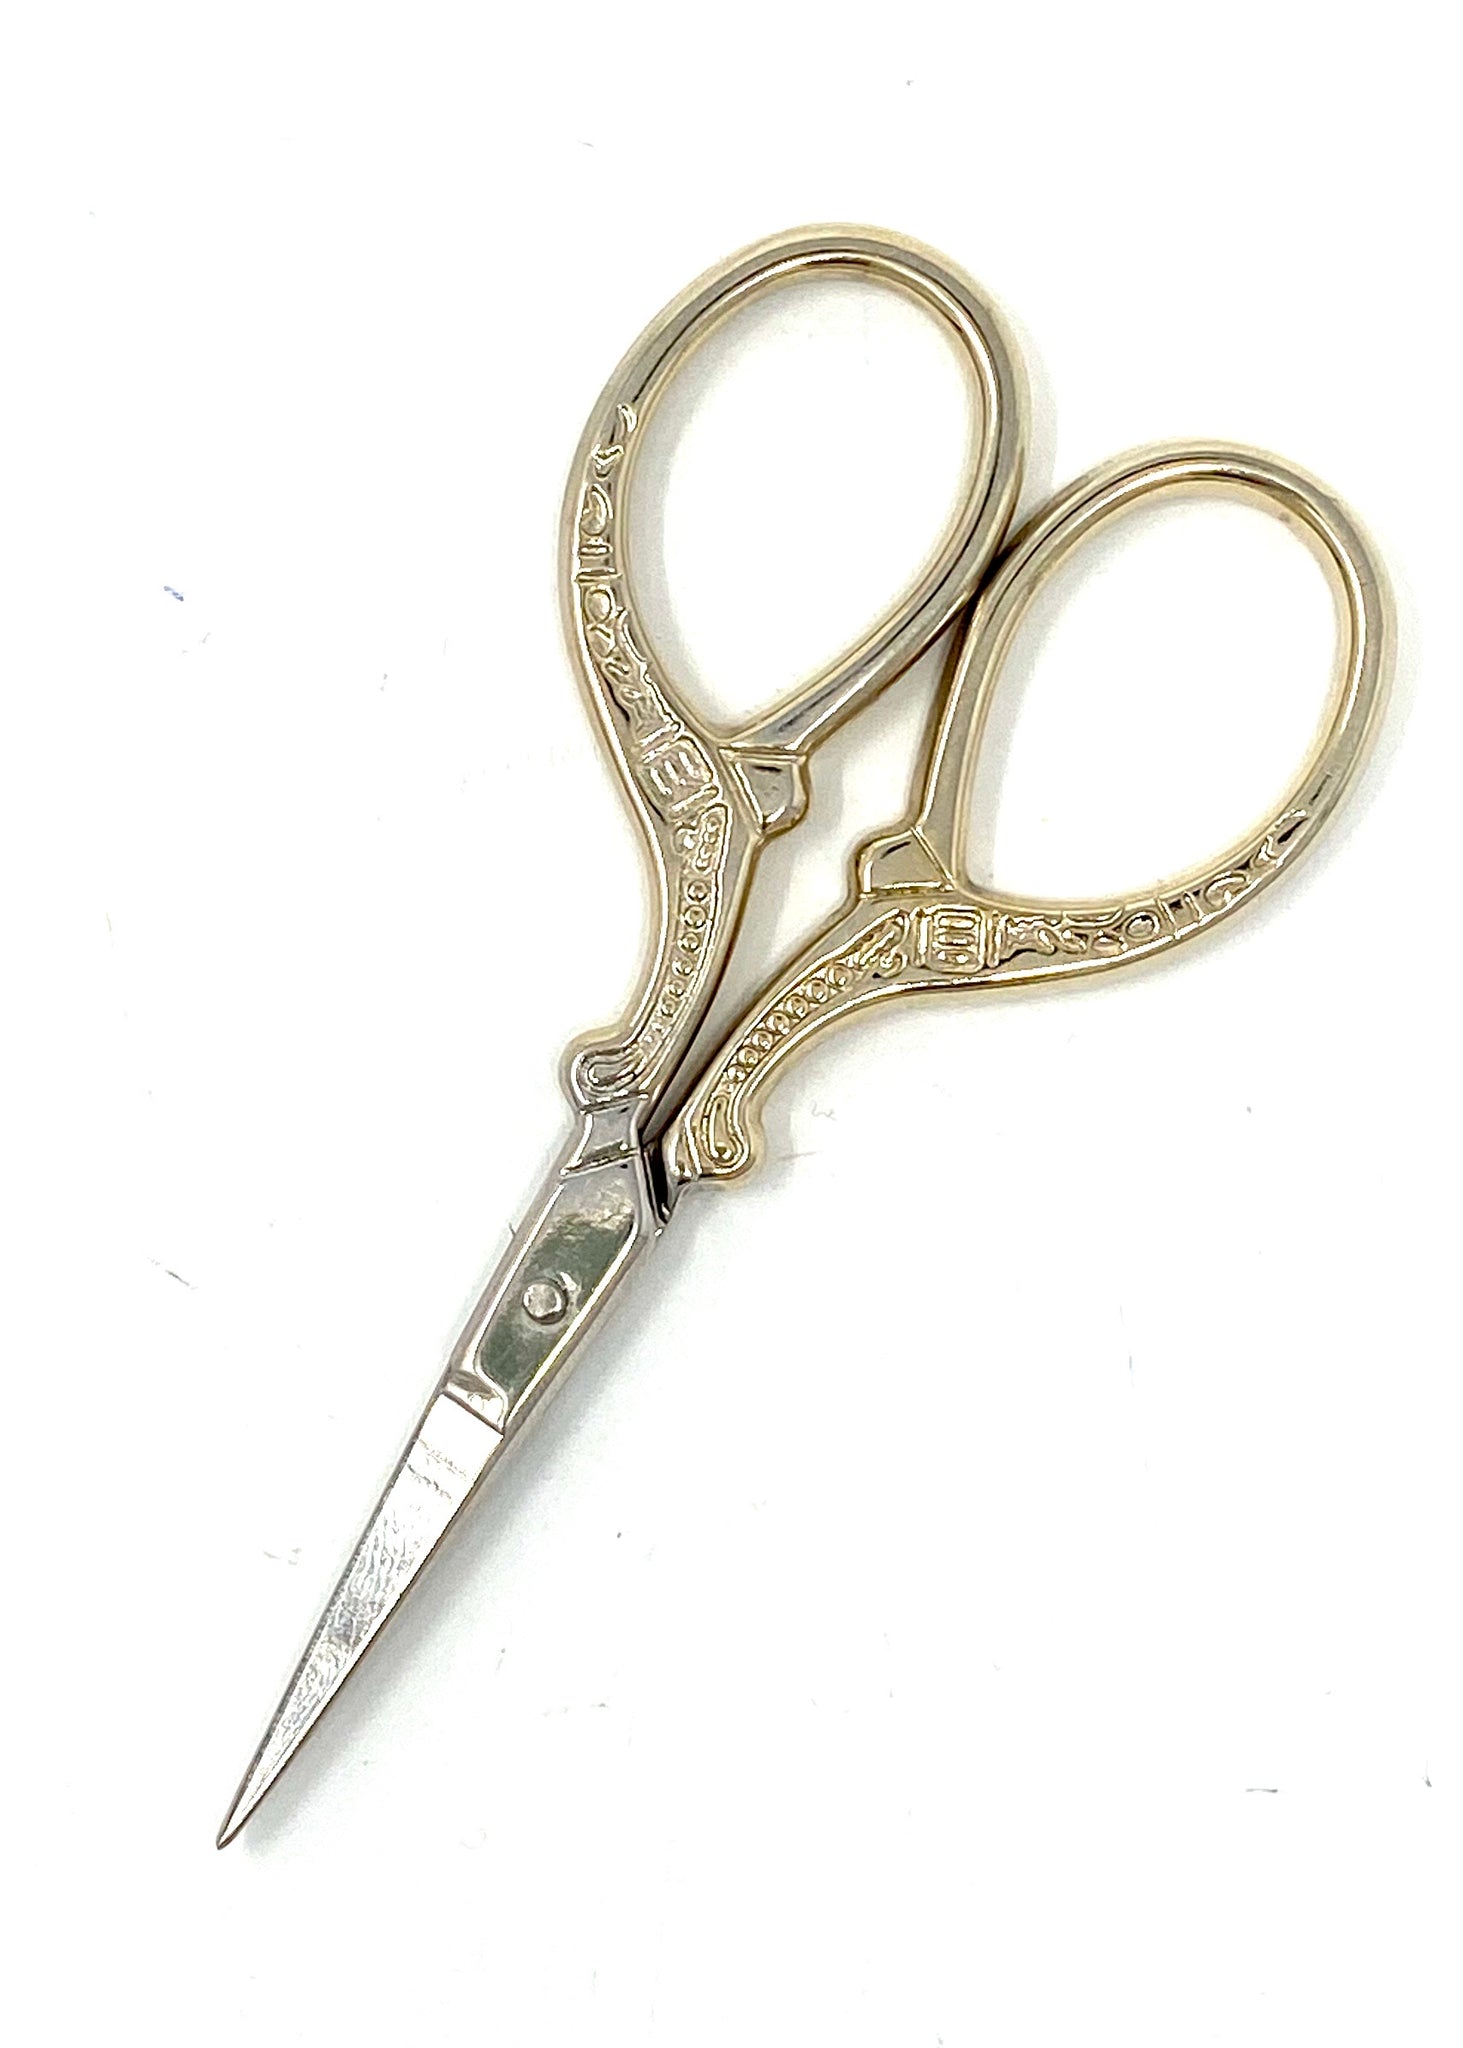 Silver Sewing Scissors With Elegant Embossing Sharp Blade Victoria Style  Scissors Vintage Paper Craft Scissors European Craft Scissors 